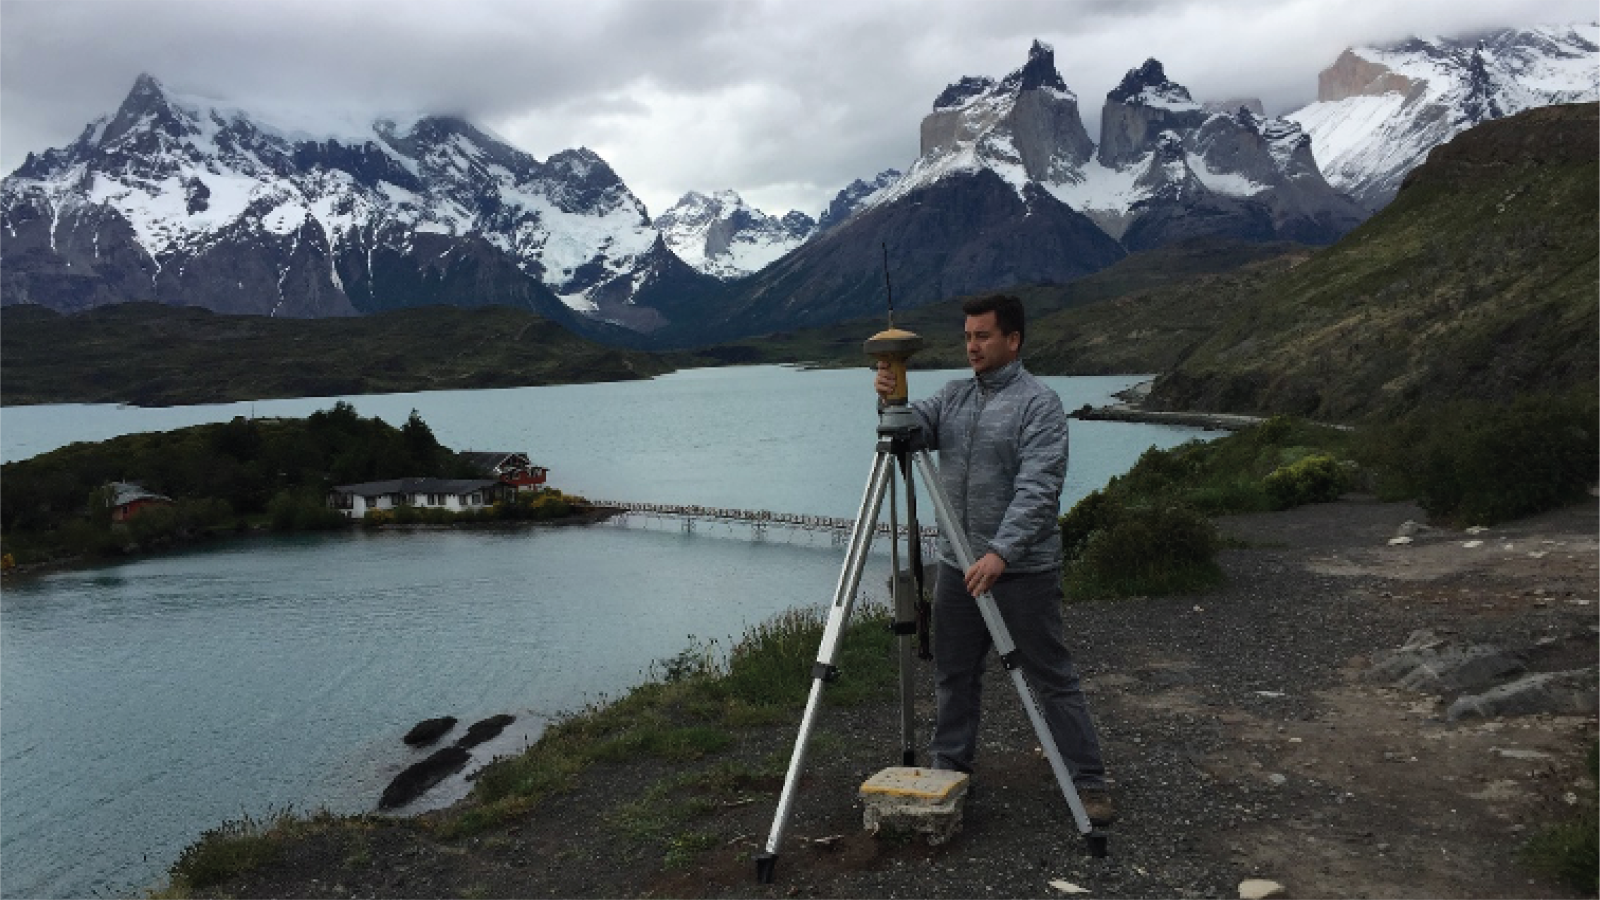 Julio carries out field work in front of a blue mountain lake